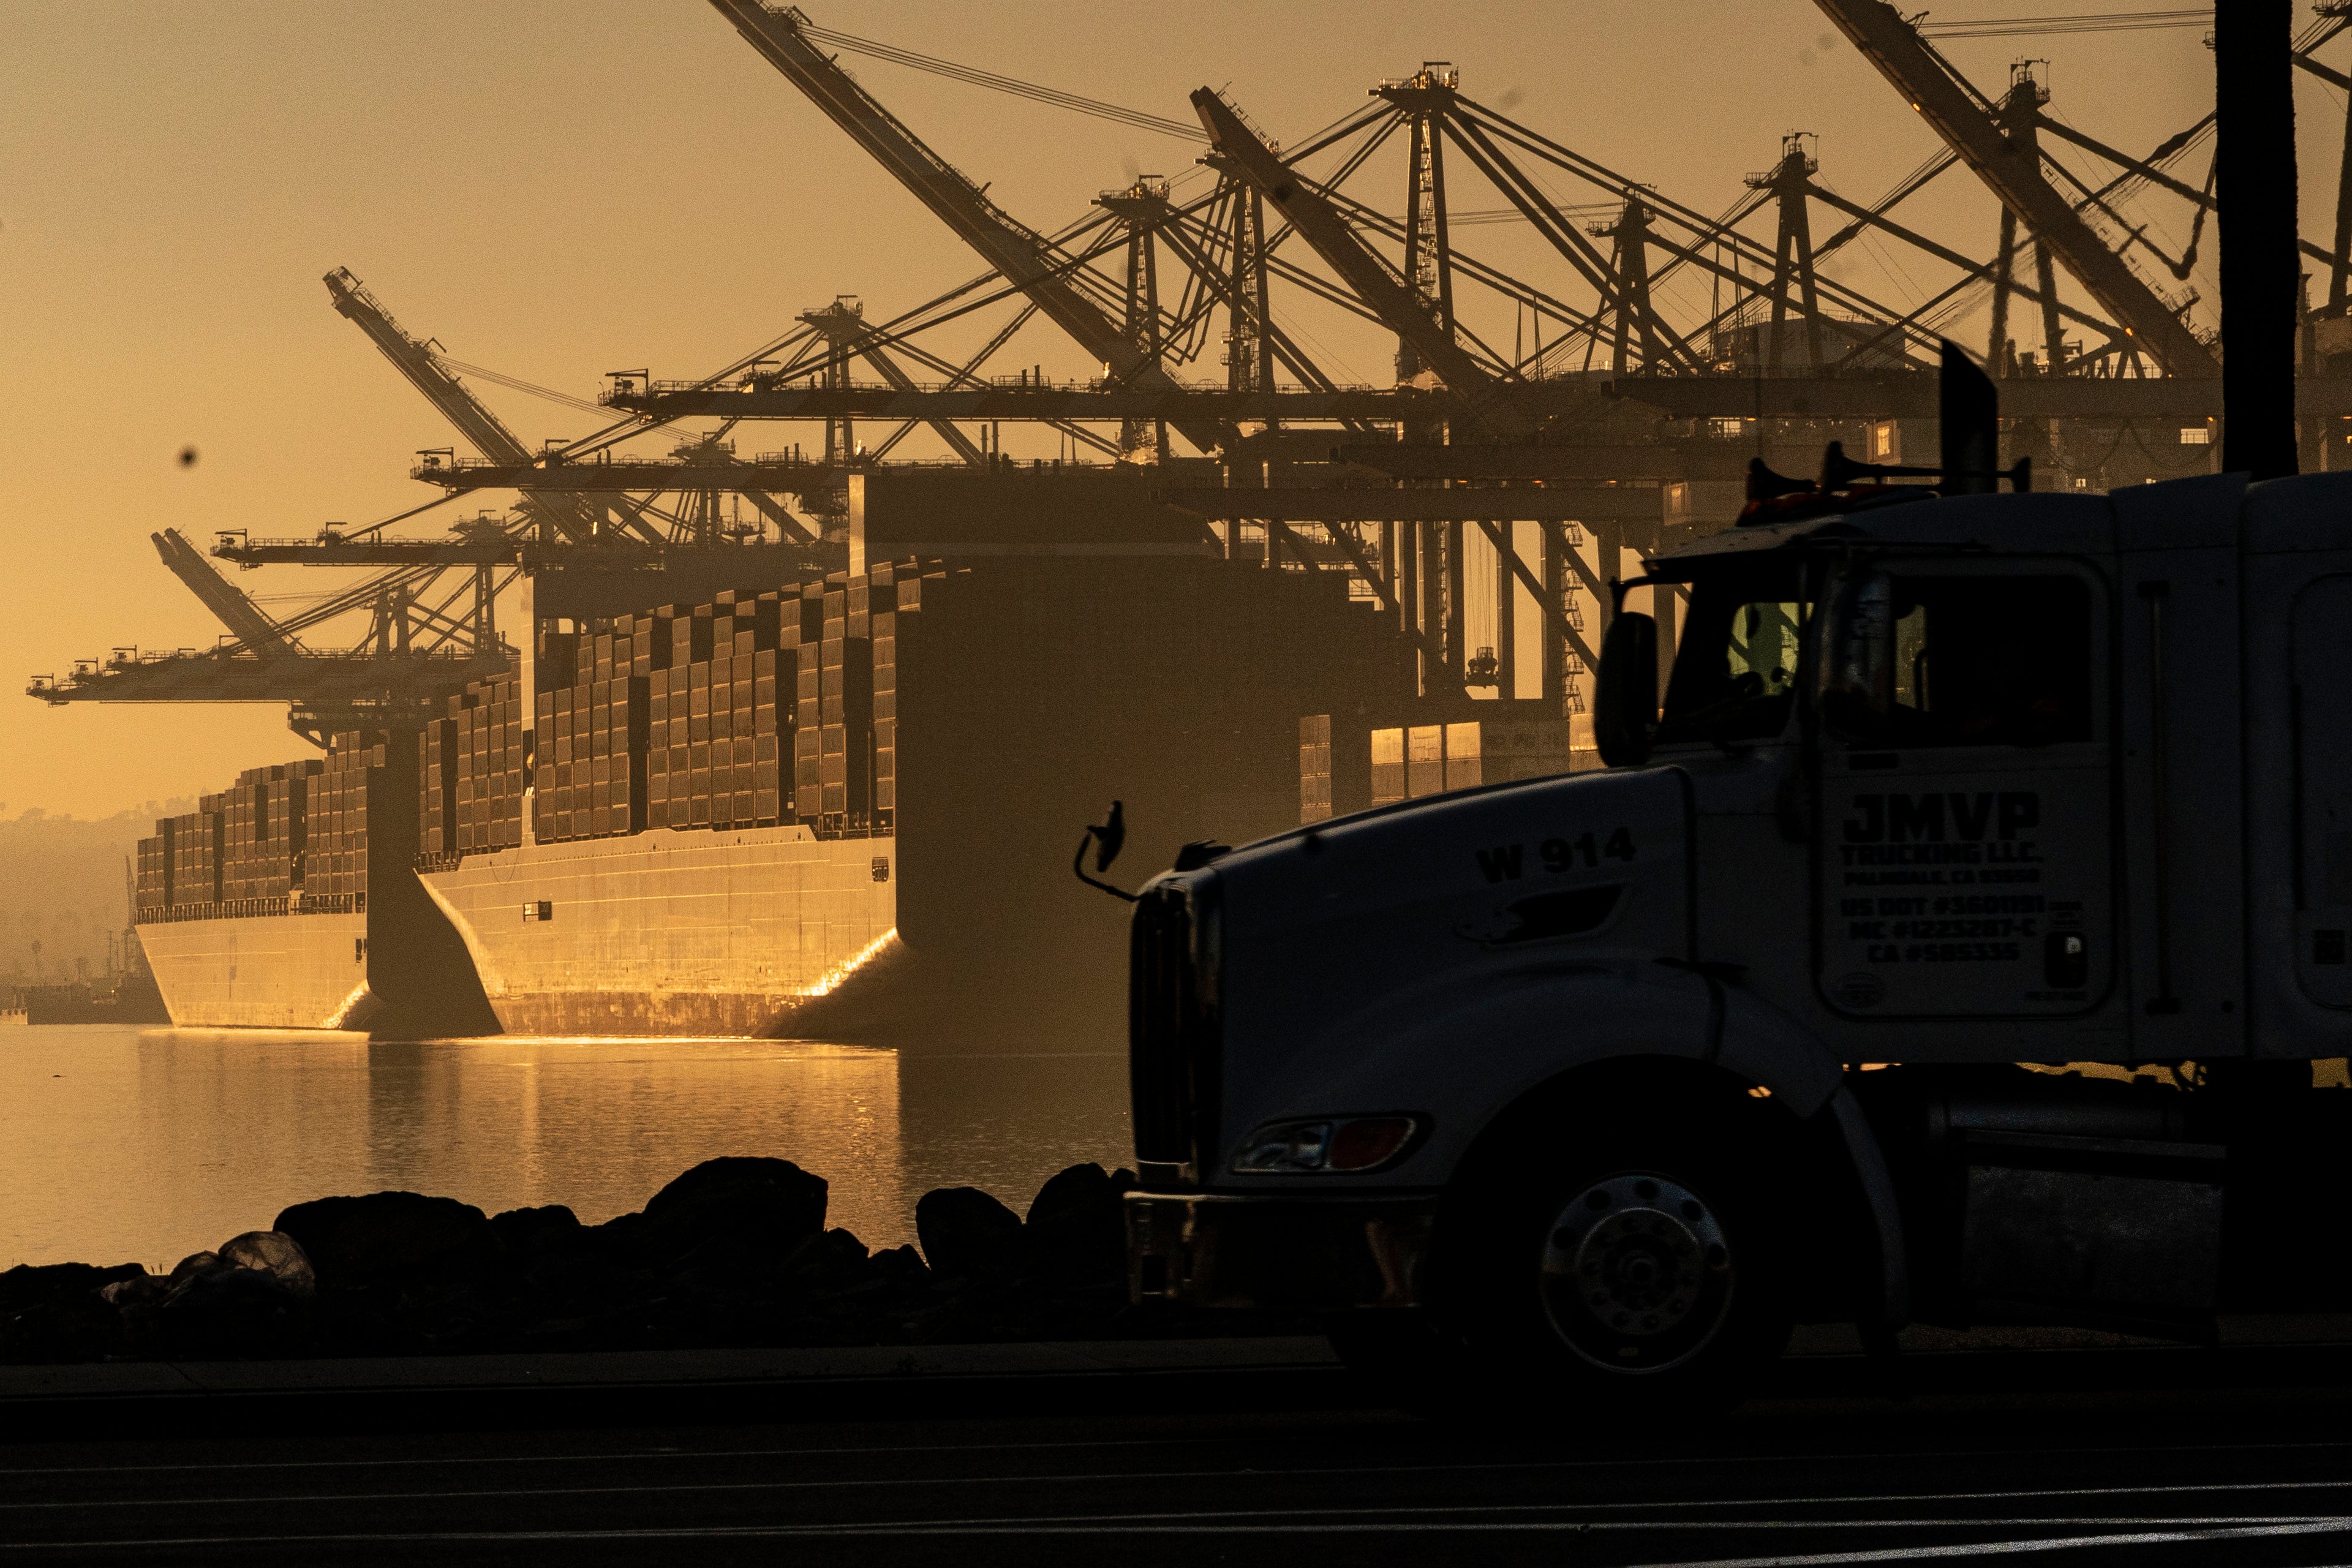 Ports, such have this one in LA, have worked hard to try and clear up global supply issues